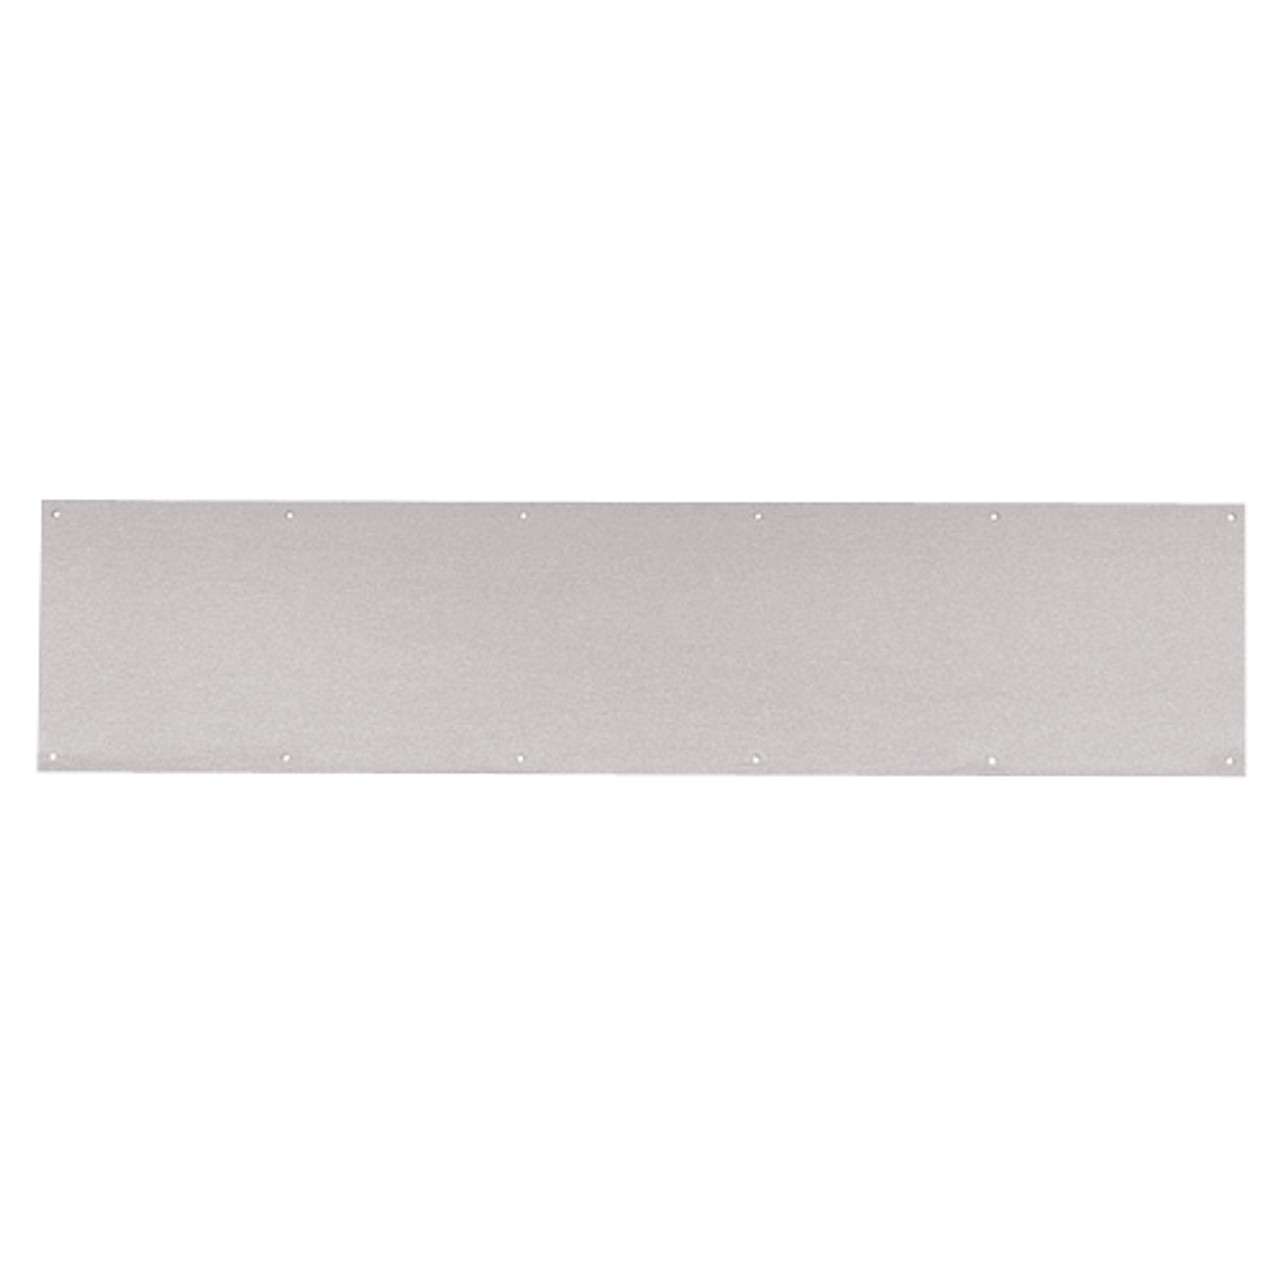 8400-US32D-10x33-B-CS Ives 8400 Series Protection Plate in Satin Stainless Steel